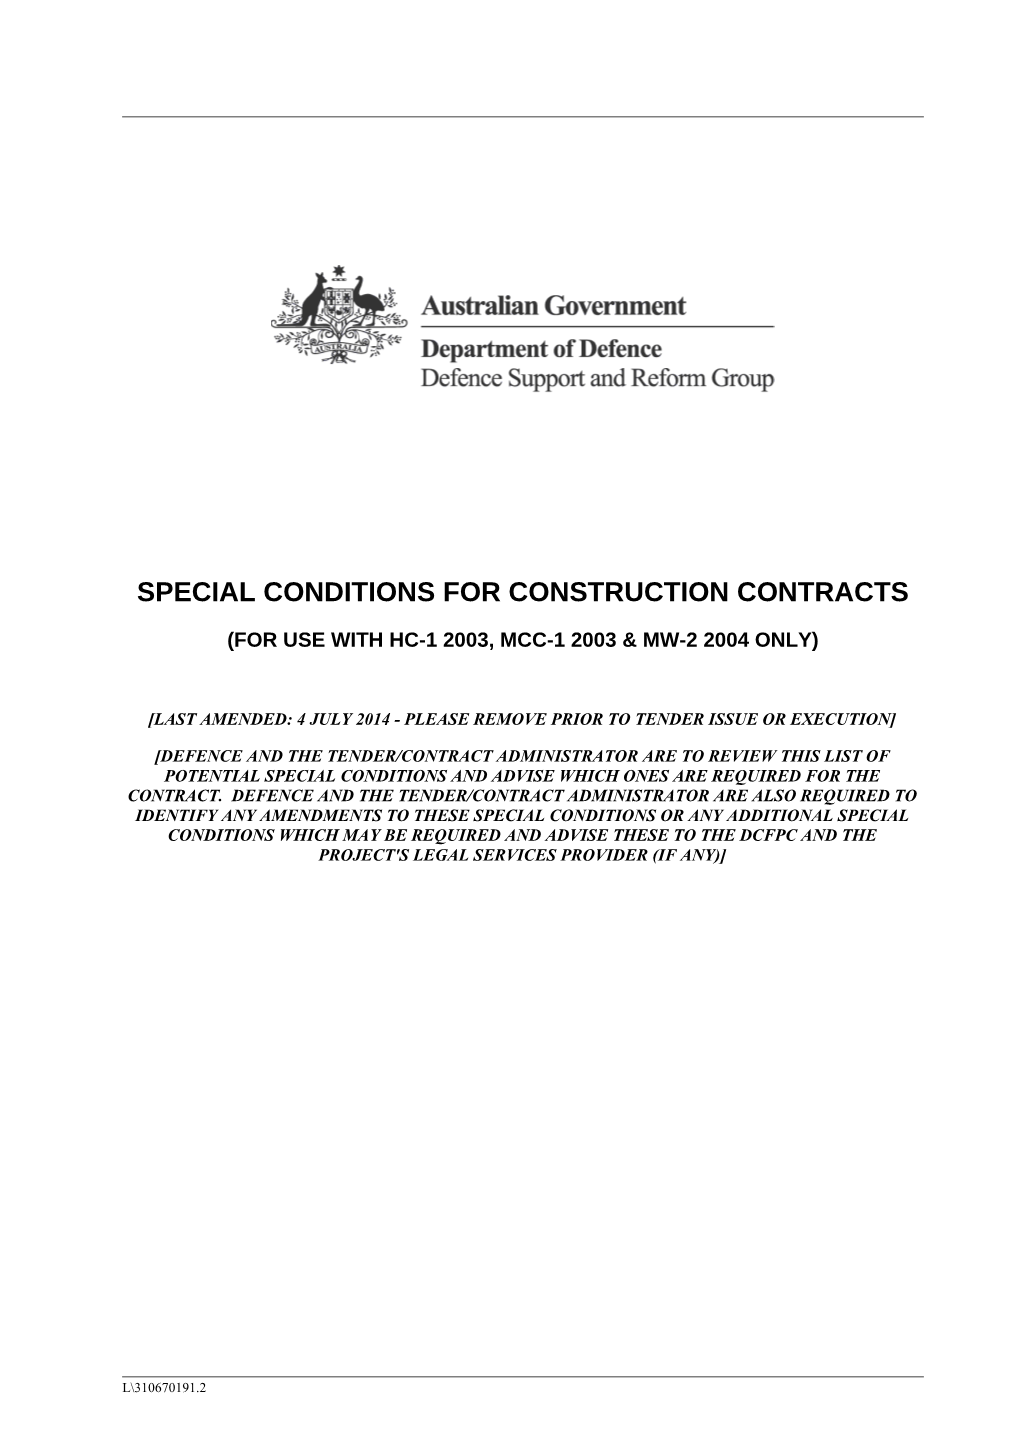 Special Conditions for Construction Contracts